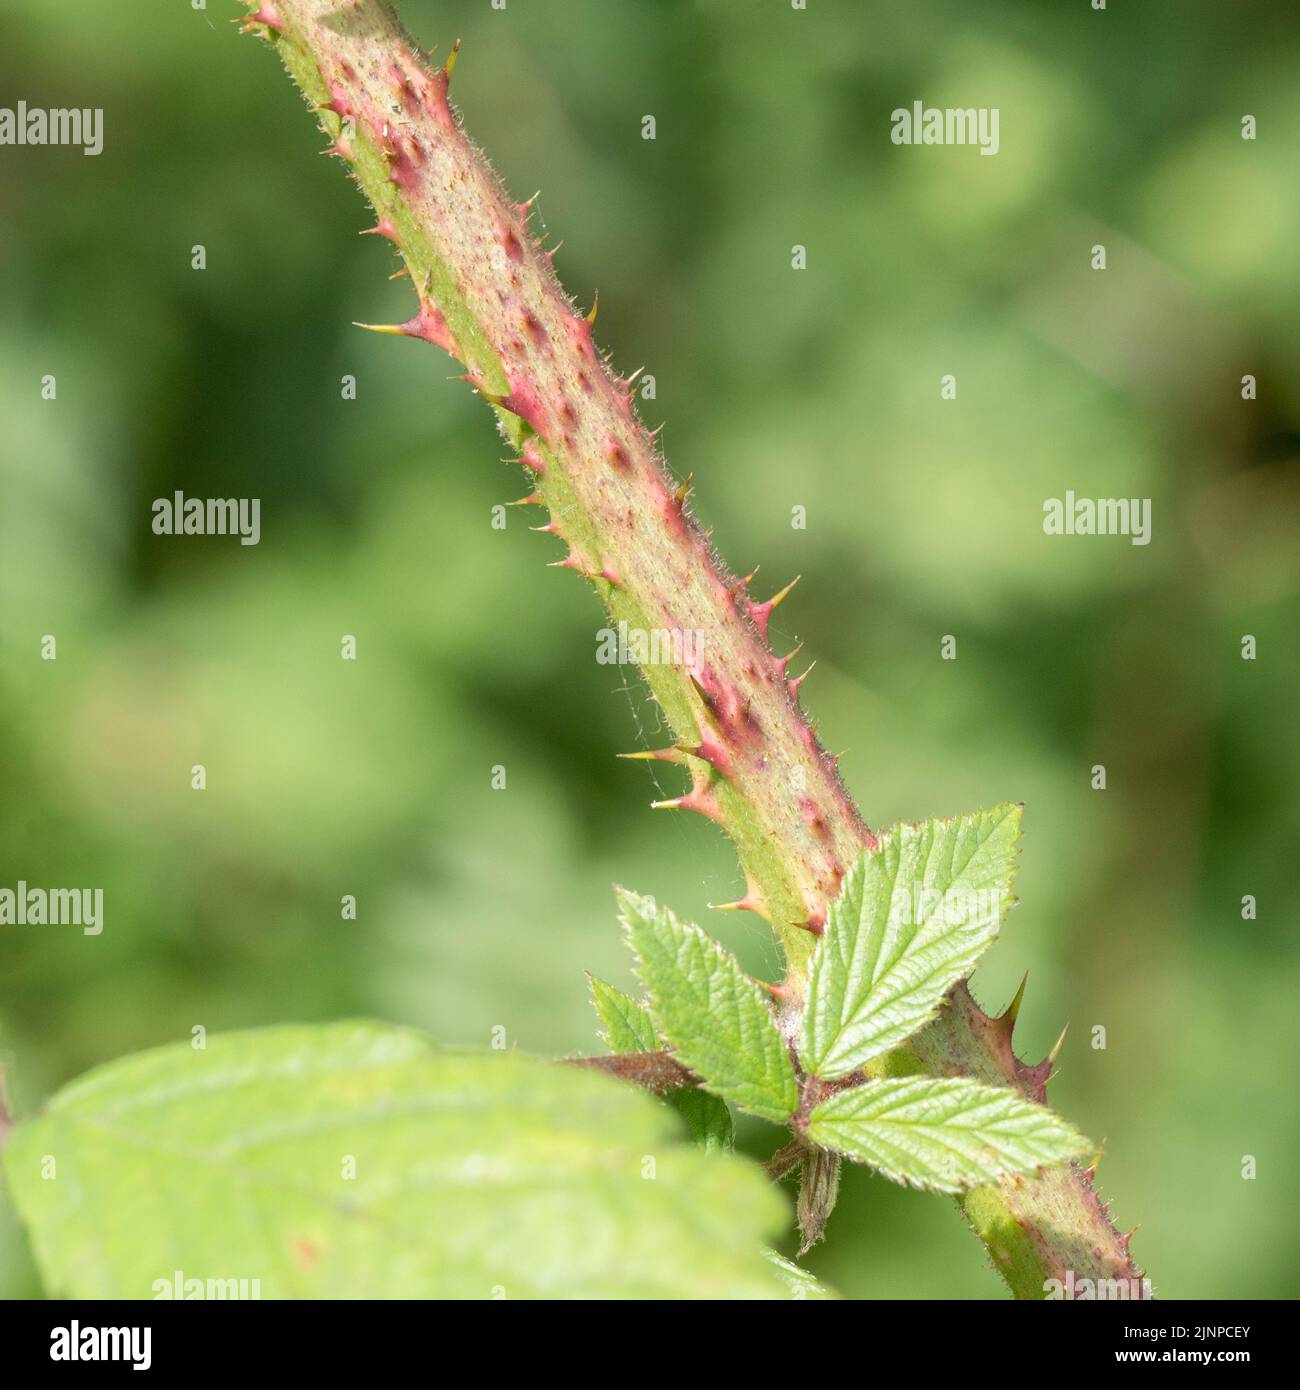 Close-up of spiky prickles on new-ish bramble cane. Metaphor for painful and sharp. Bramble / Rubus fruticosus formerly used for herbal remedies. Stock Photo